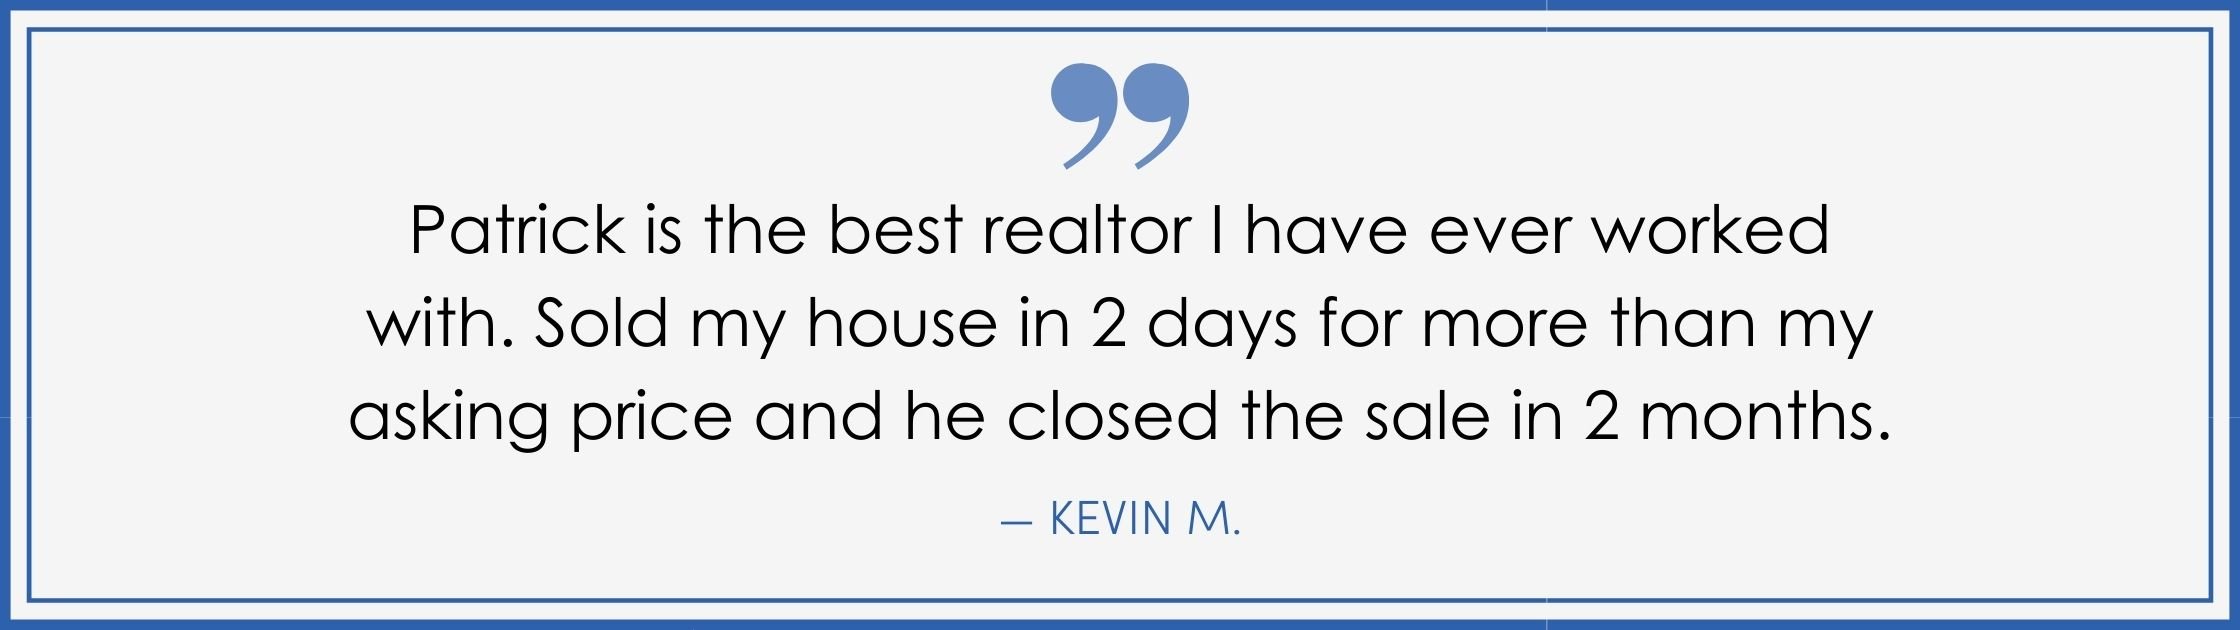 “Patrick is the best realtor I have ever worked with. Sold my house in 2 days for more than my asking price and he closed the sale in 2 months.” –Kevin M. (Copy) (Copy)